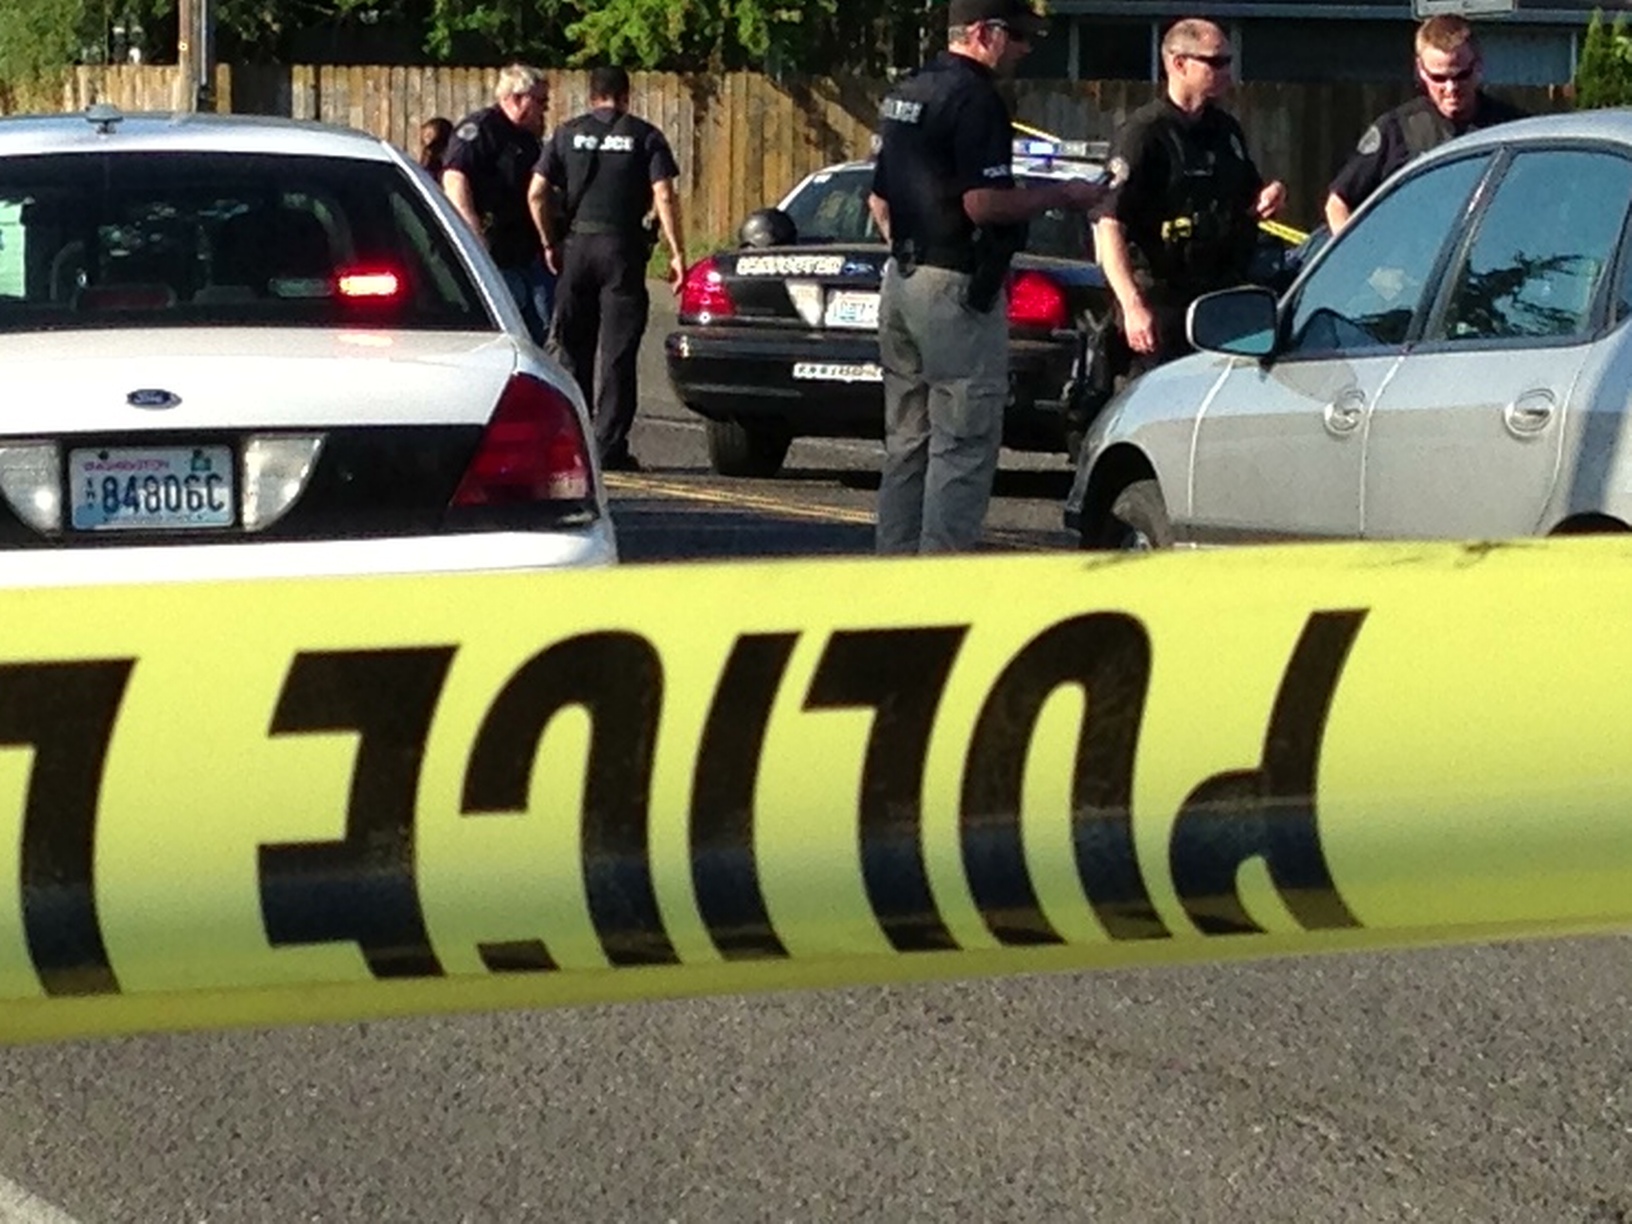 Law enforcement officials converge on the scene of a shooting Thursday in Vancouver's Fruit Valley neighborhood.